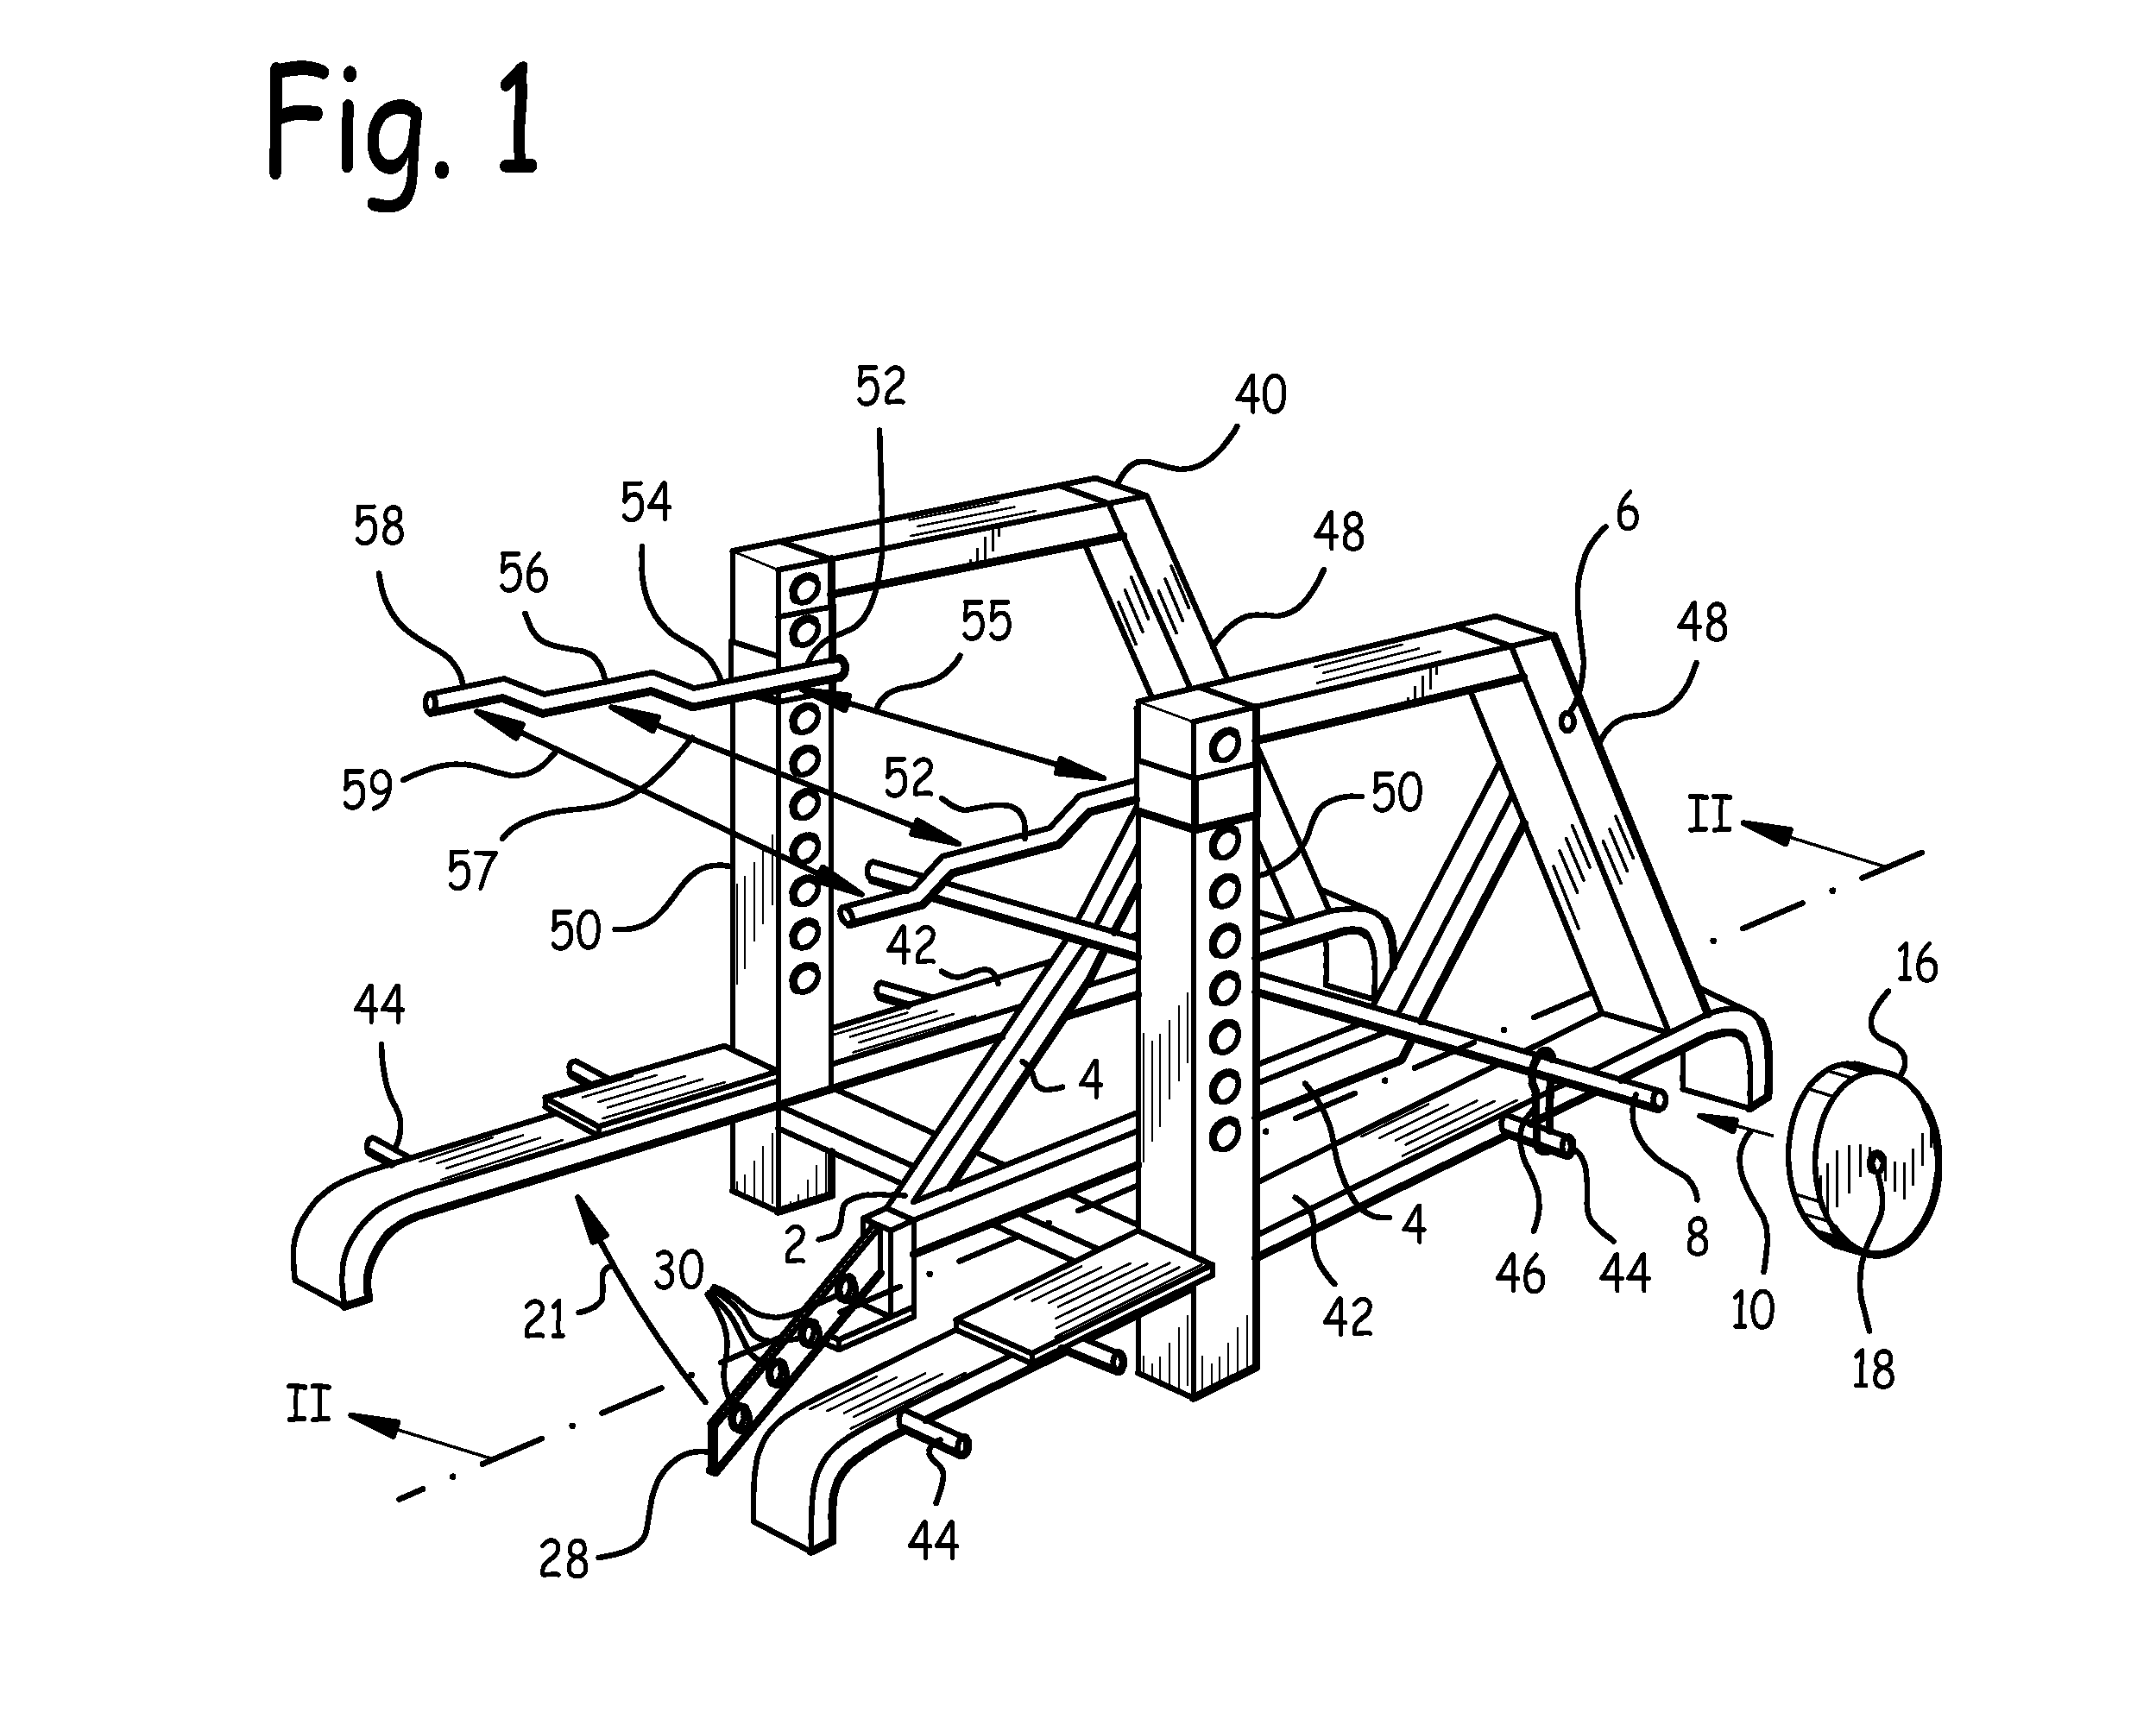 Exercise Arm Apparatus and Method of Use